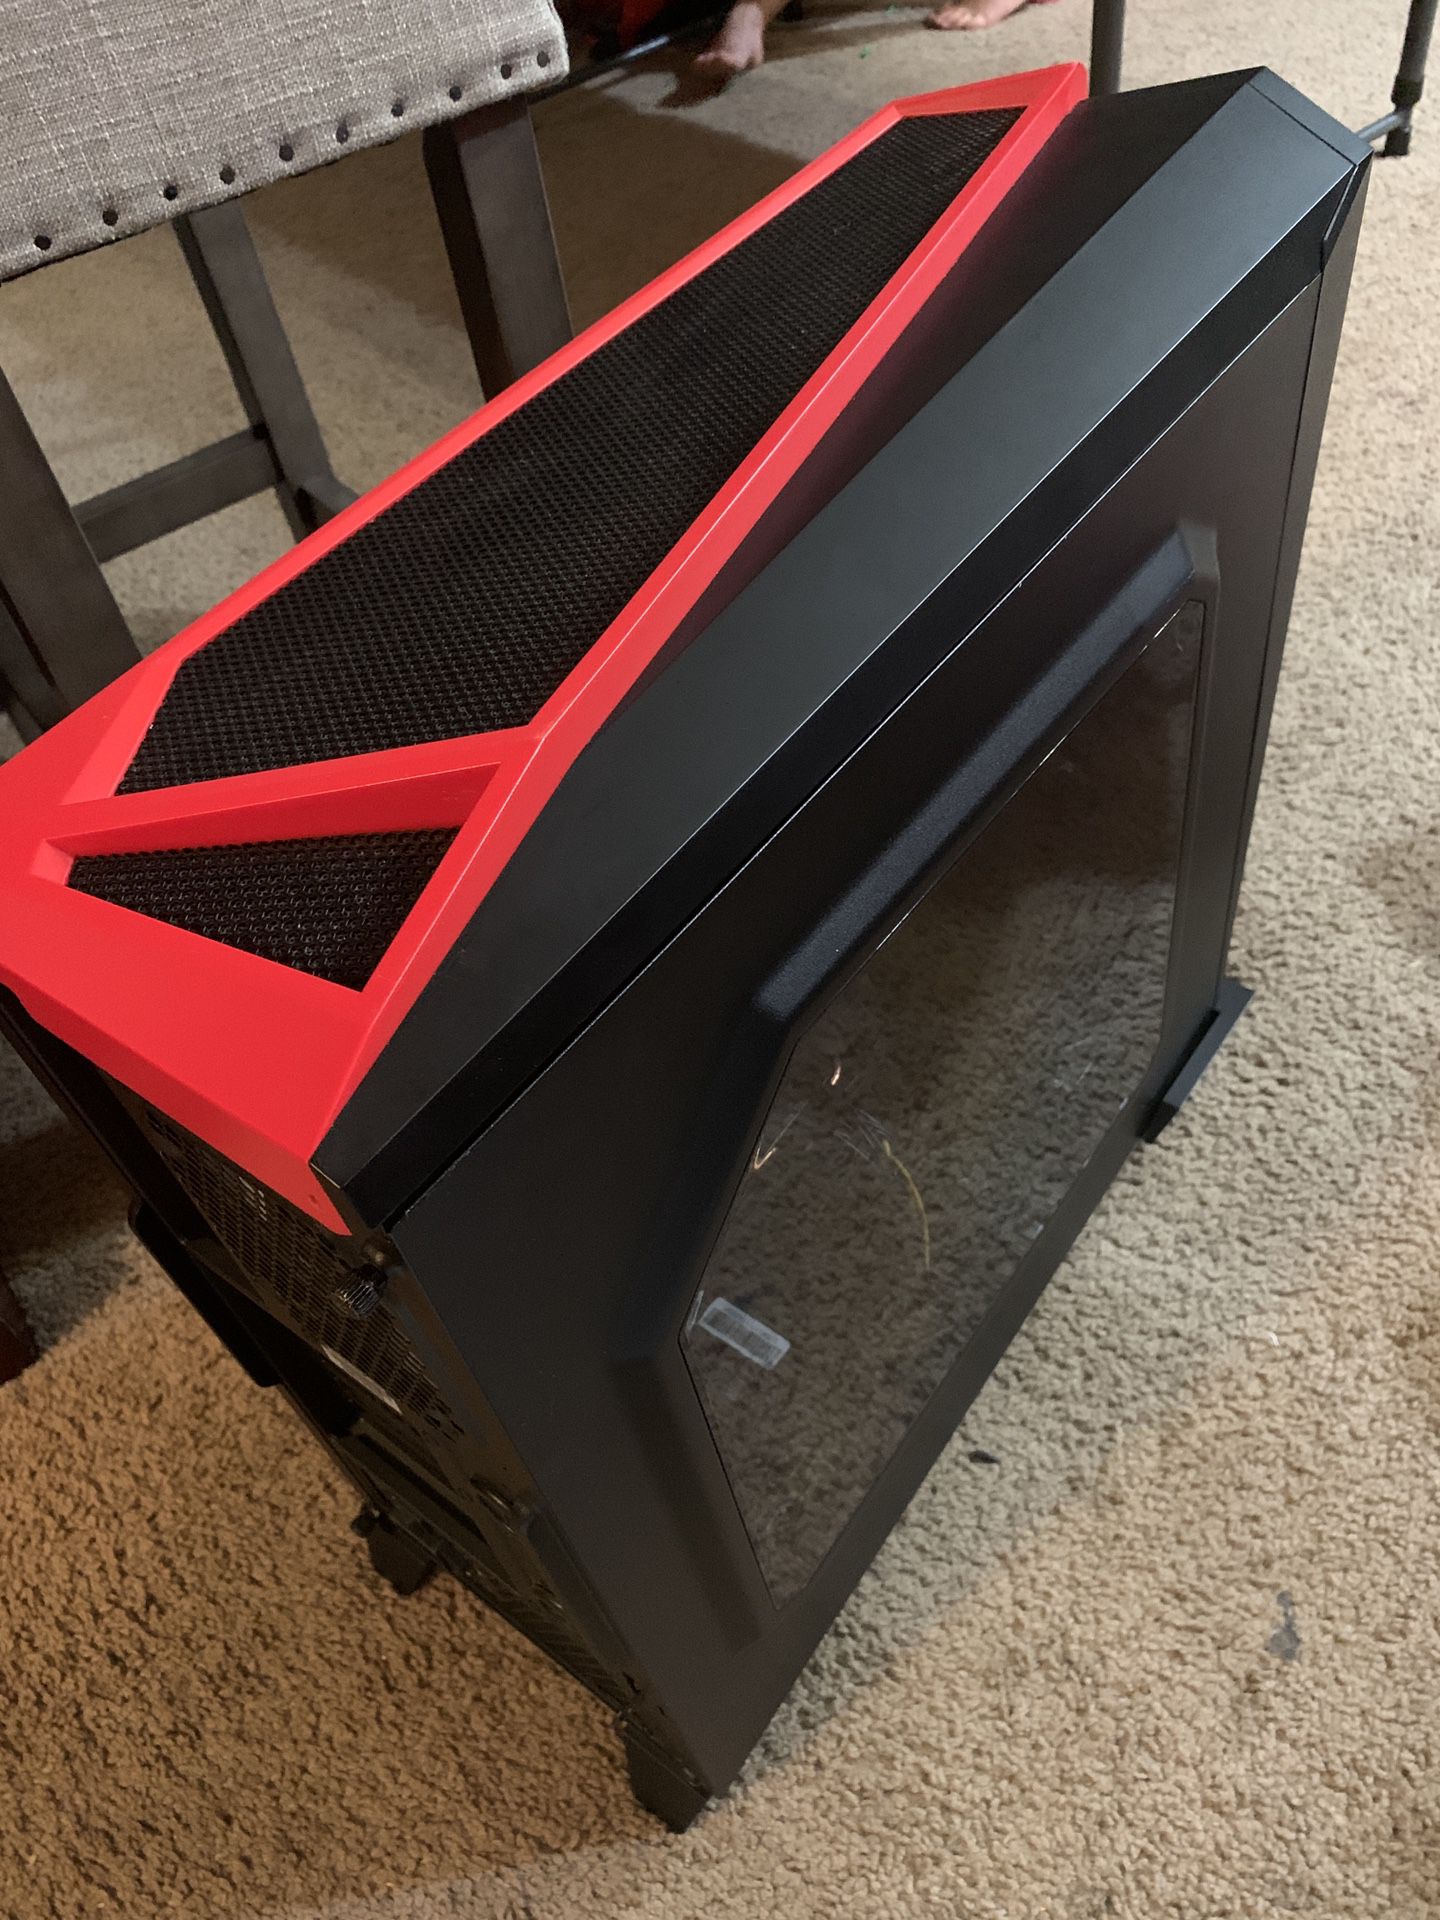 Custom build gaming pc ,27”Monitior keyboard and mouse